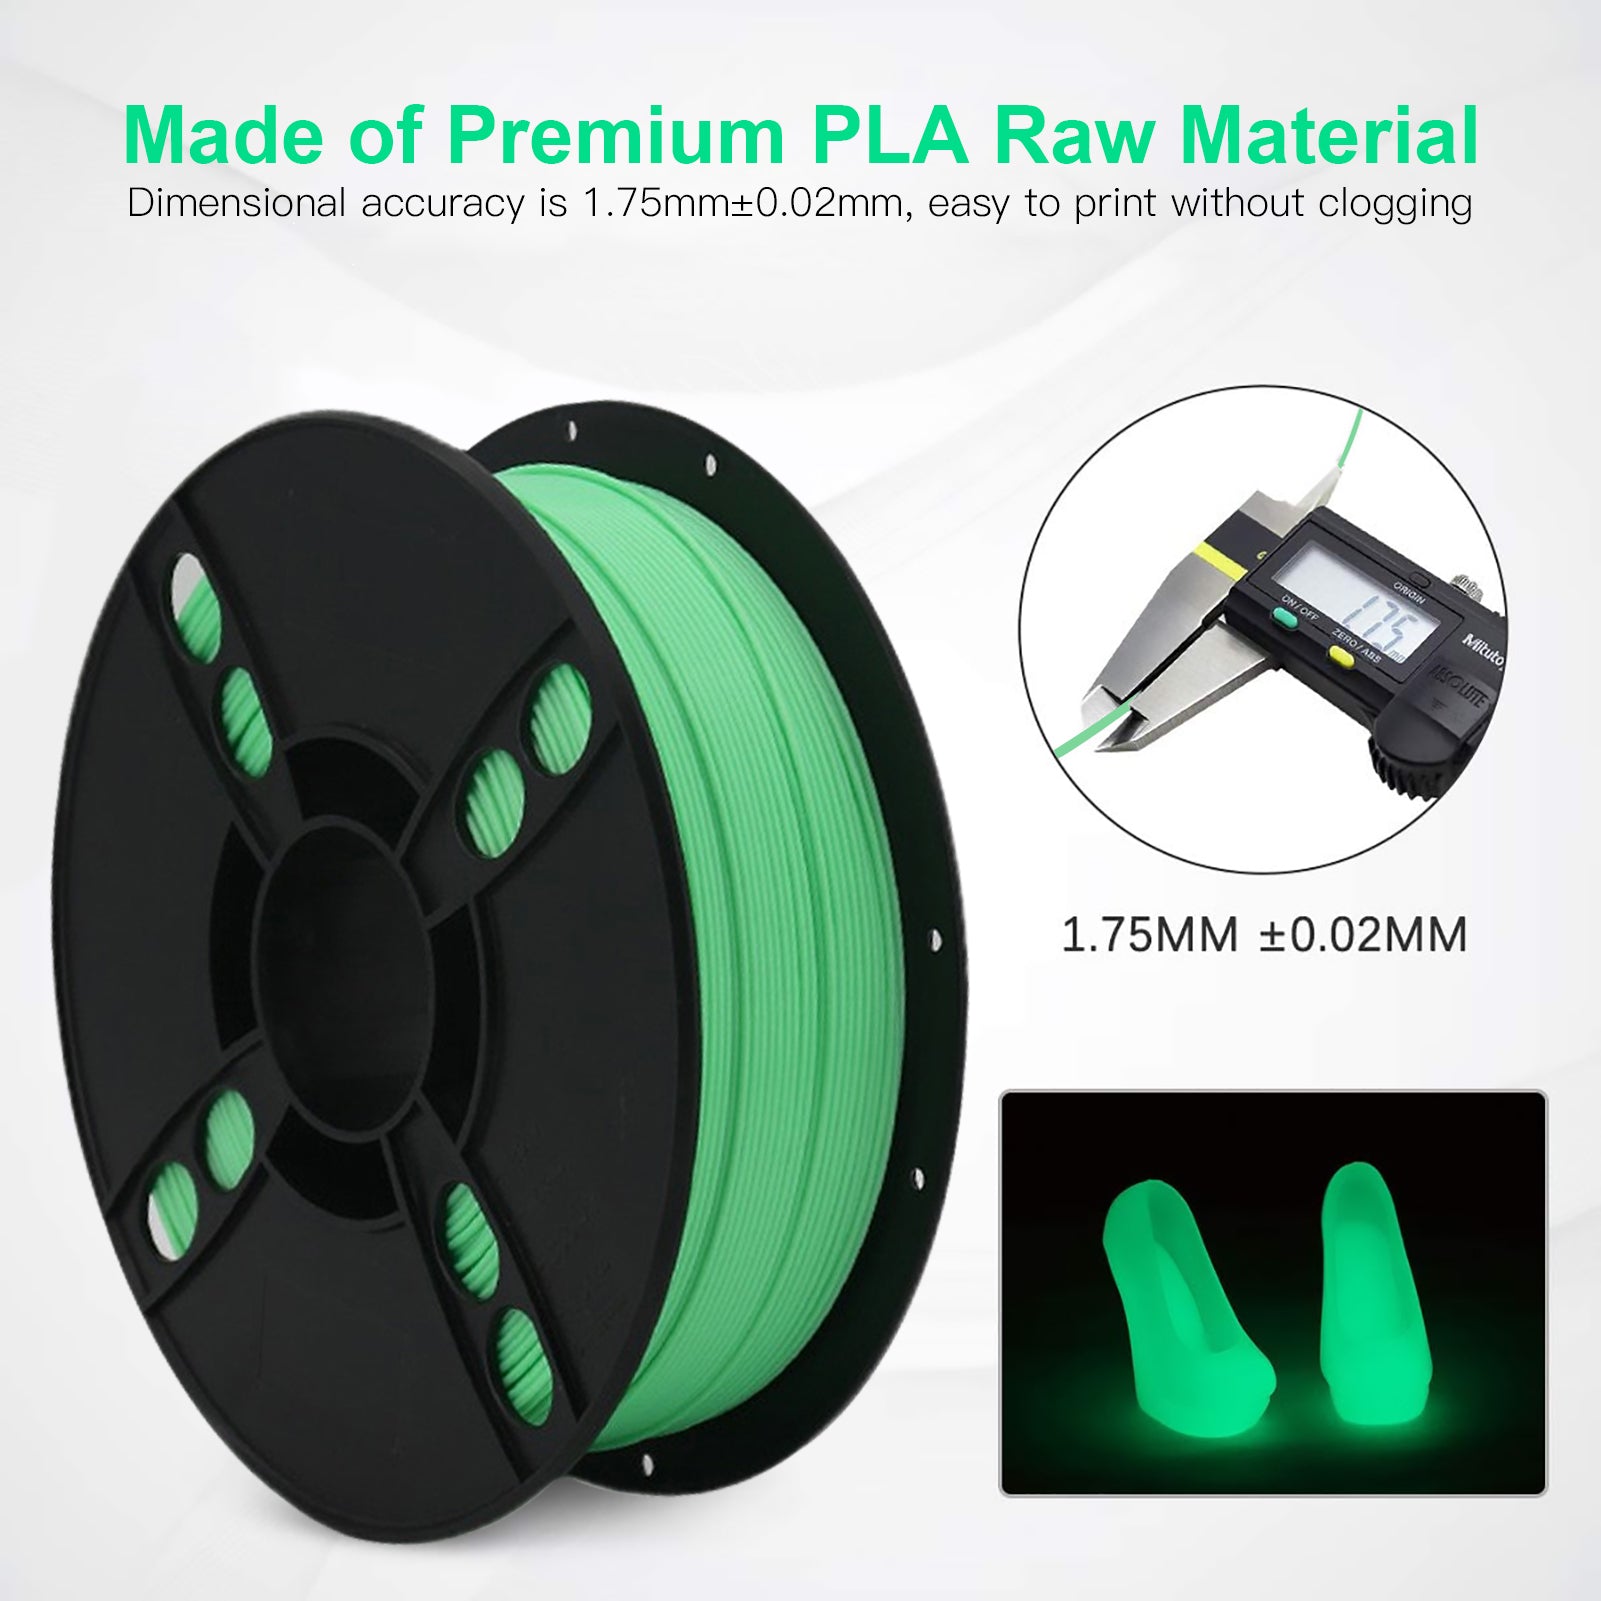 1kg Spool PLA Luminous Filament 1.75mm diameter Glow in The Dark printing consumables compatible with Creality, Ender 3, Ender 5, Sidewinder, Artillery - Pink Orange